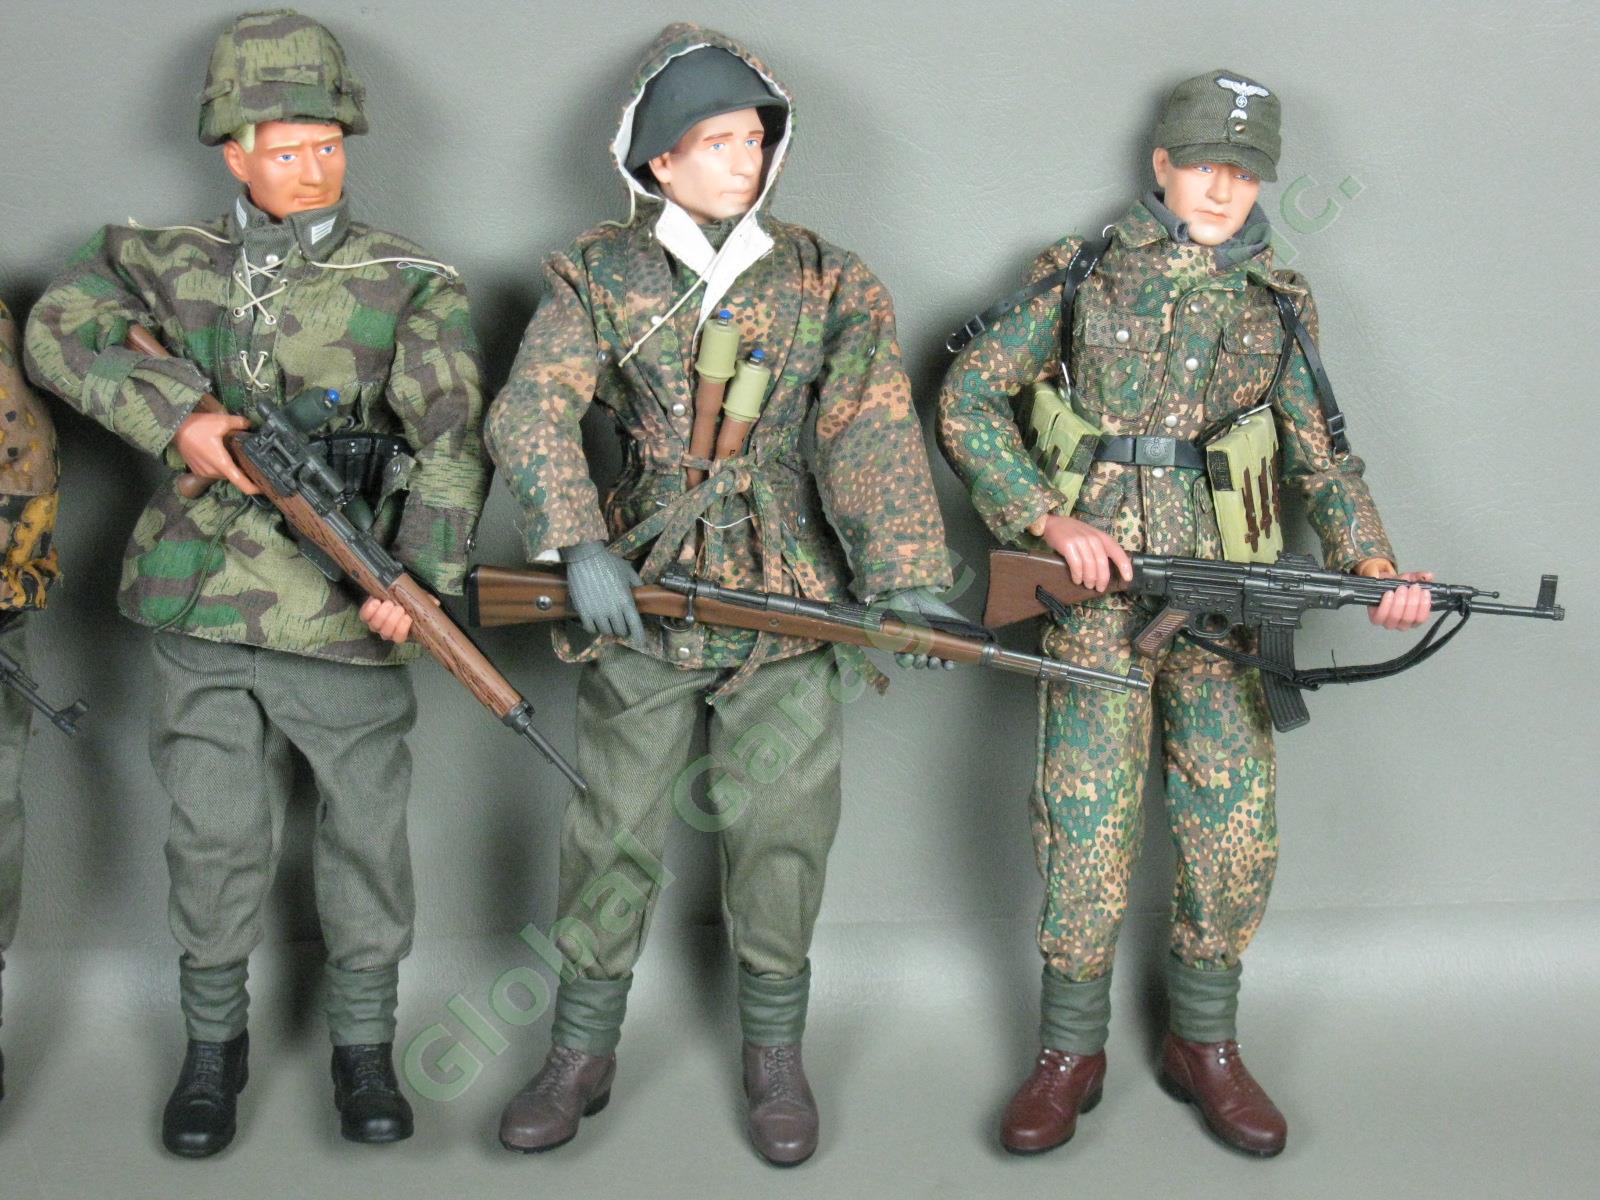 6 Dragon 1/6 Scale 12" WWII German Camo Army Soldier Figures Lot w/Accessories 2